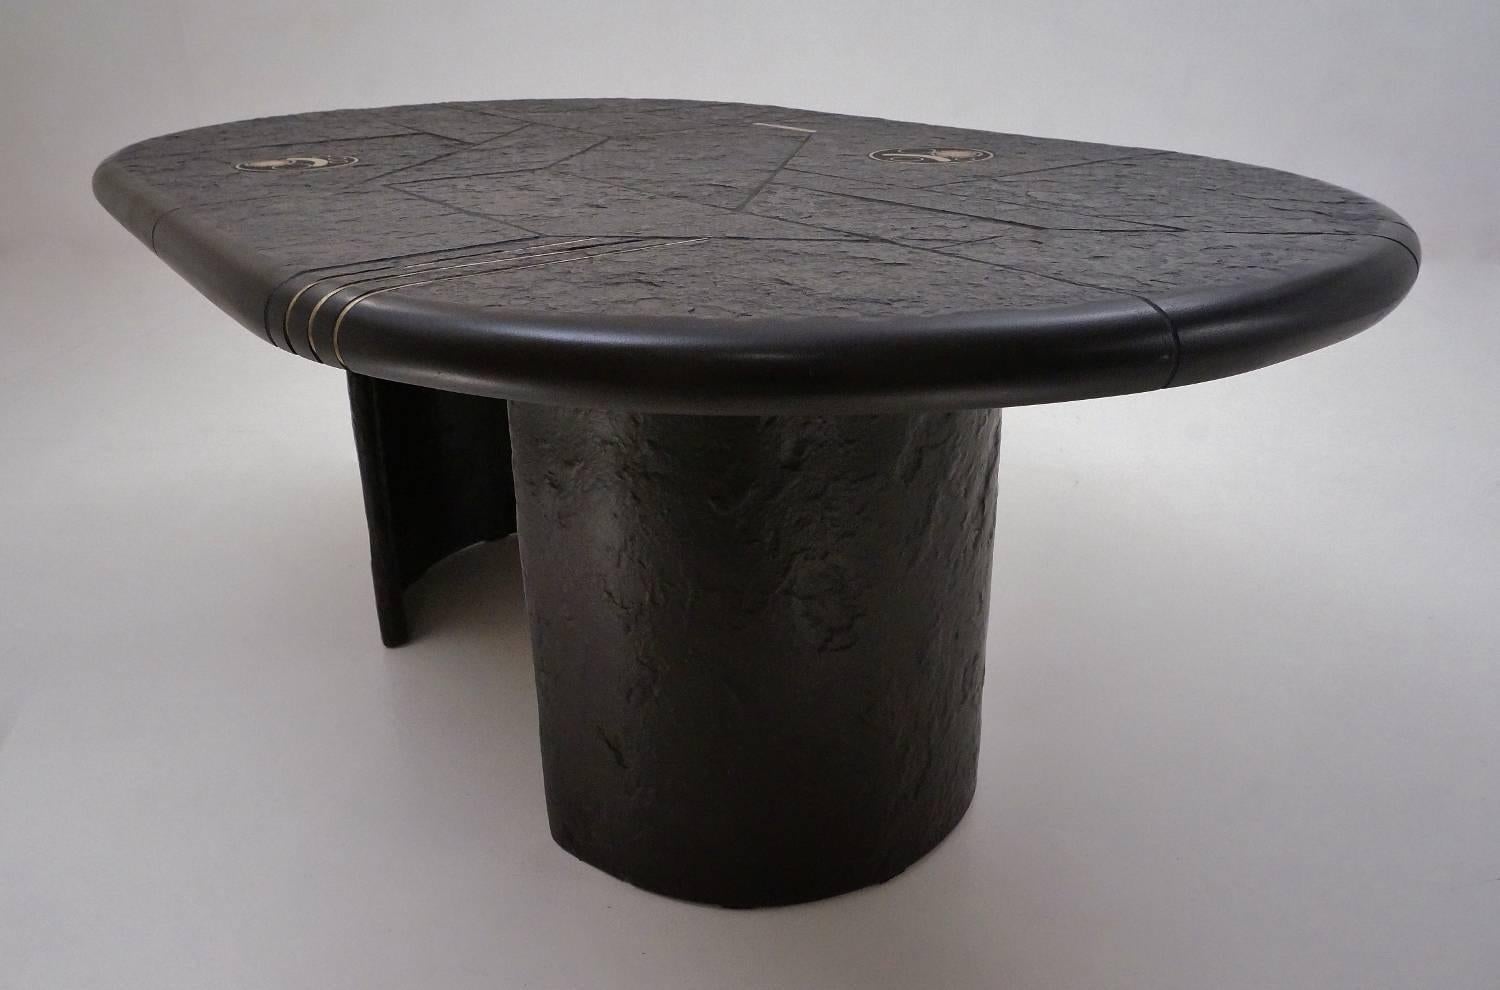 Paul Kingma coffee table, slate with brass inlay, signed by the designer, circa 1980s, Dutch.

This table has been gently cleaned while respecting the vintage patina.

Bold and strong this table signed by the sculptor Paul Kingma is an early and